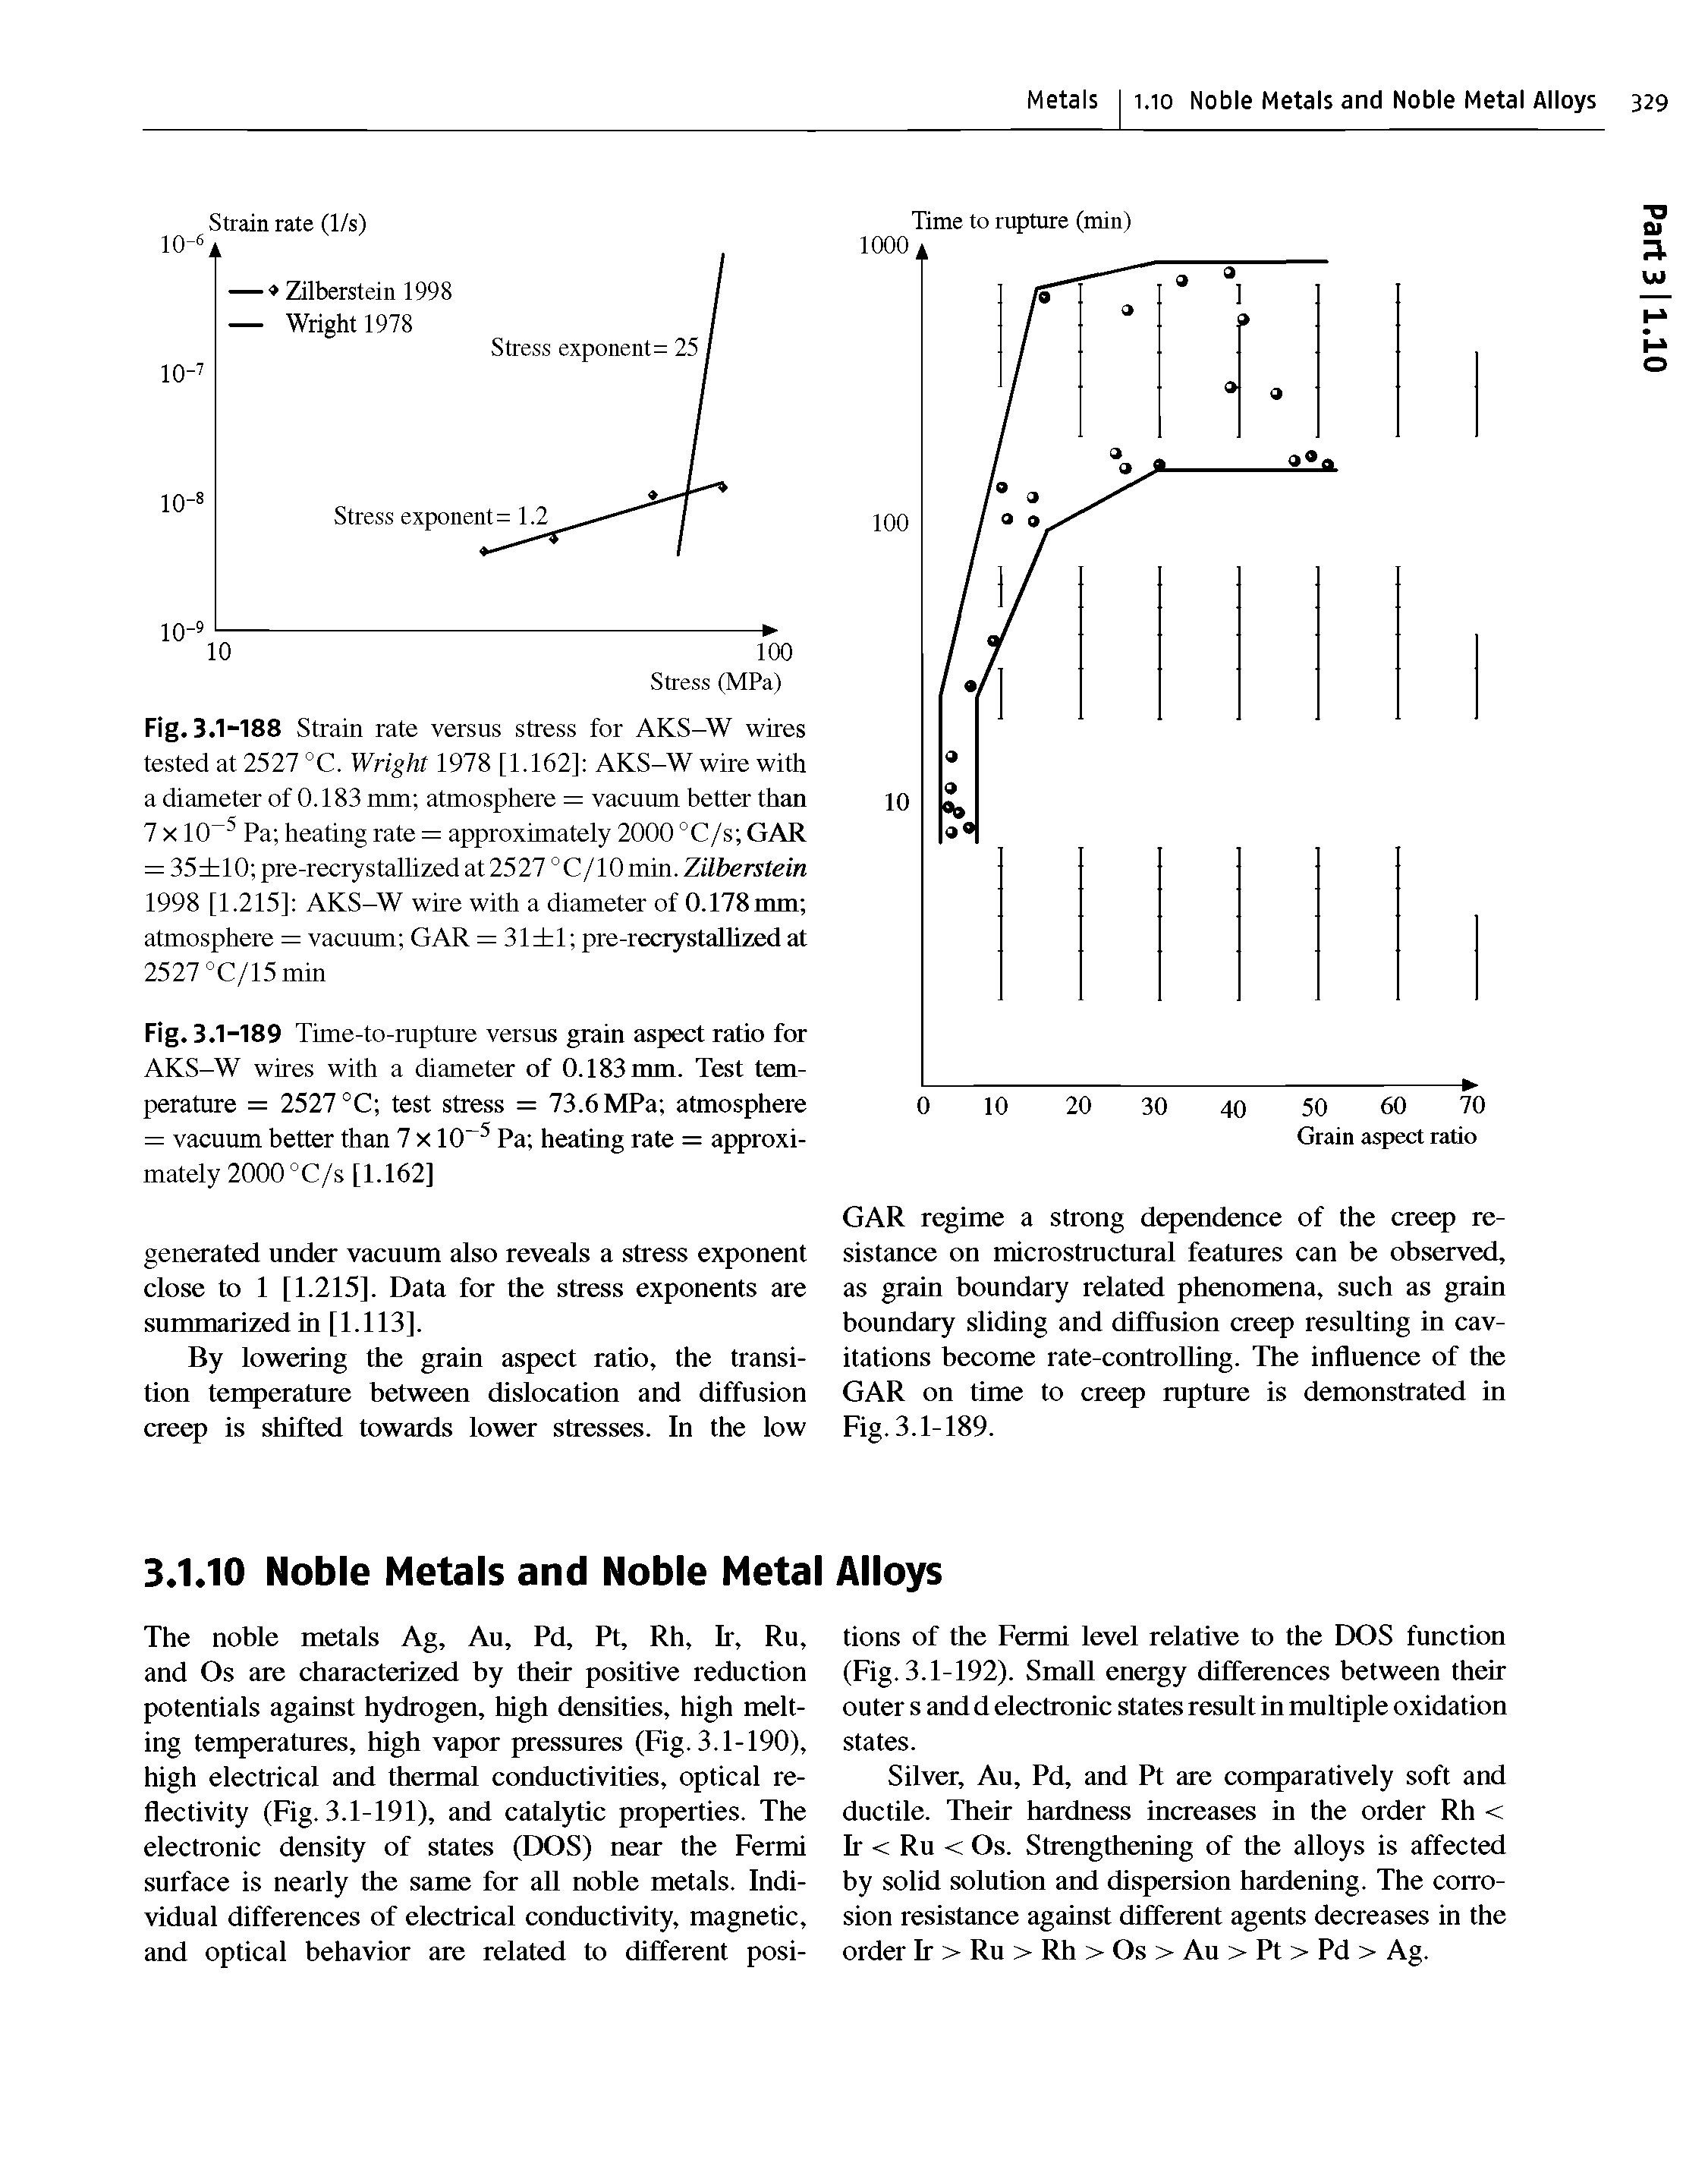 Fig. 3.1-188 Strain rate versus stress for AKS-W wires tested at 2527 °C. Wright 1978 [1.162] AKS-W wire with a diameter of 0.183 mm atmosphere = vacuum better than 7 X10 Pa heating rate = approximately 2000 °C/s GAR = 35 10 pre-recry stallized at 25 27 ° C/10 min. Zilberstein 1998 [1.215] AKS-W wire with a diameter of 0.178mm atmosphere = vacuum GAR = 31 1 pre-recrystallized at 2527 °C/15 min...